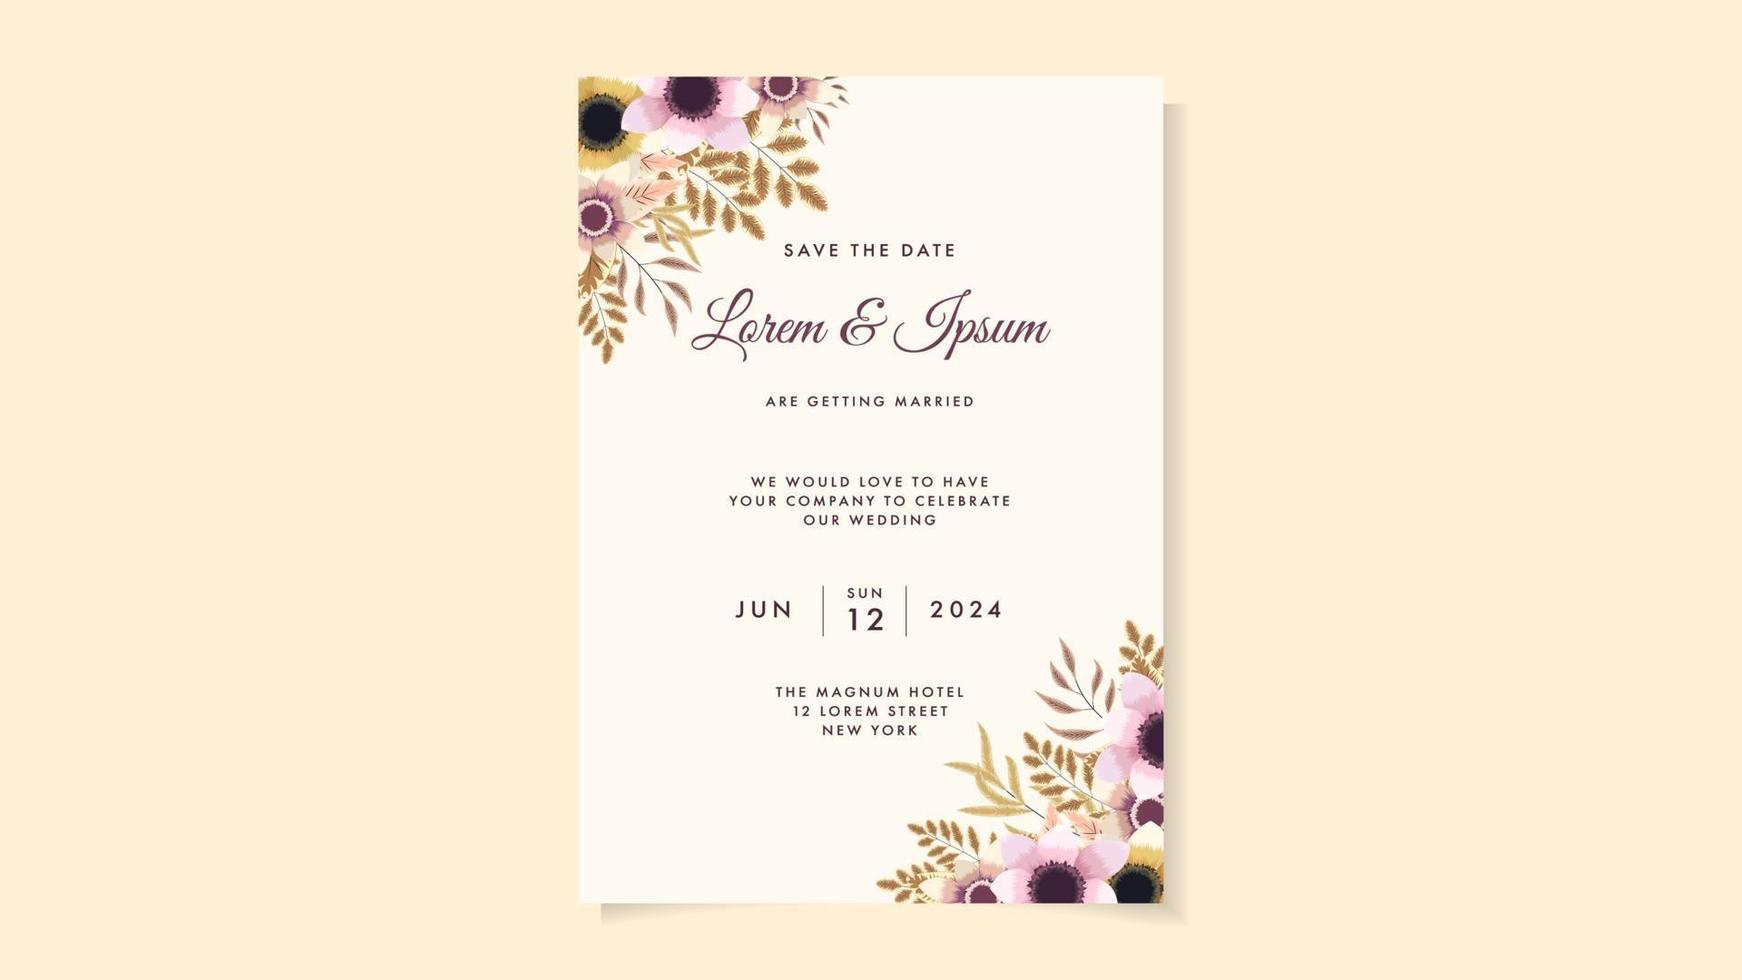 Flower marriage wedding invite card flower Save the date RSVP thanks vector